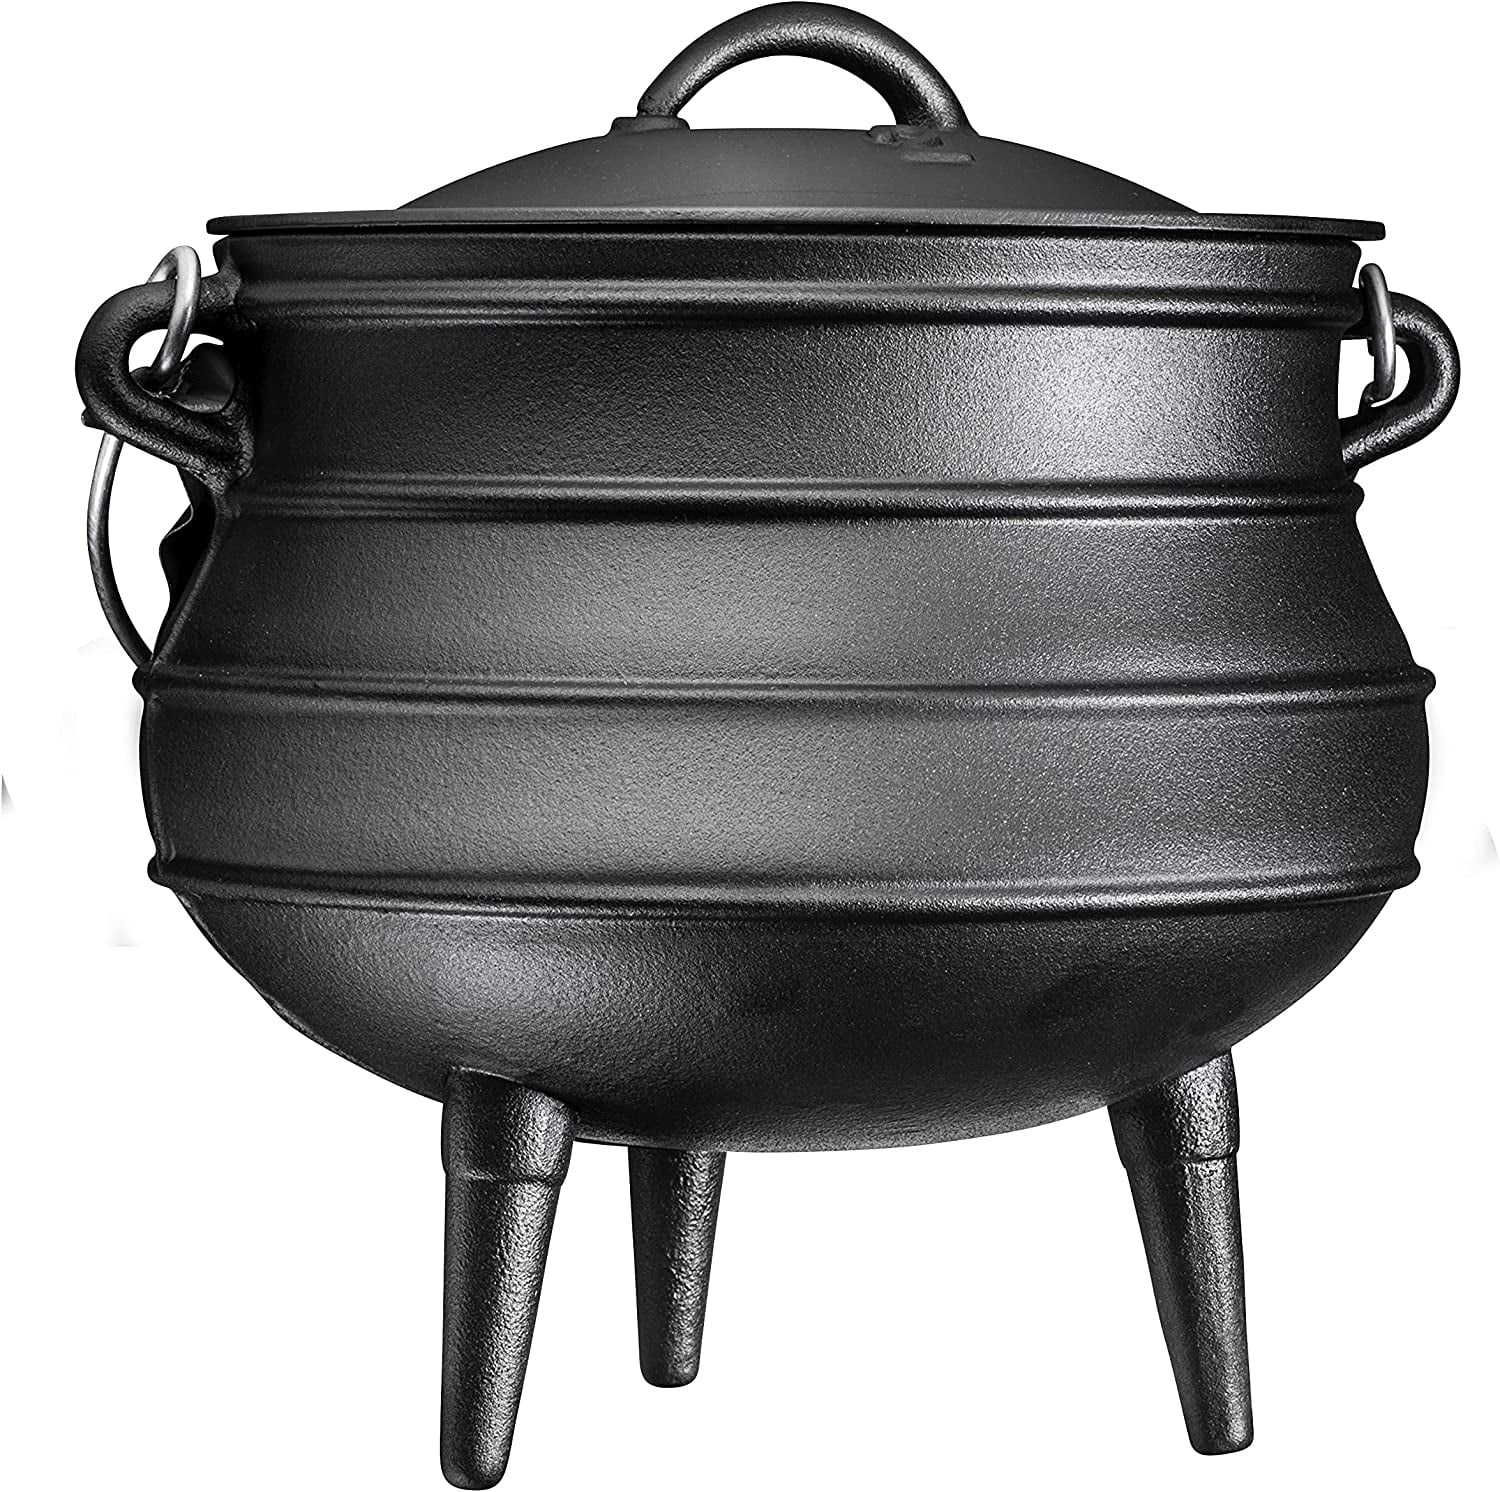 The Shopper-Loved Lodge Cast Iron Grill Pan Is $14 on